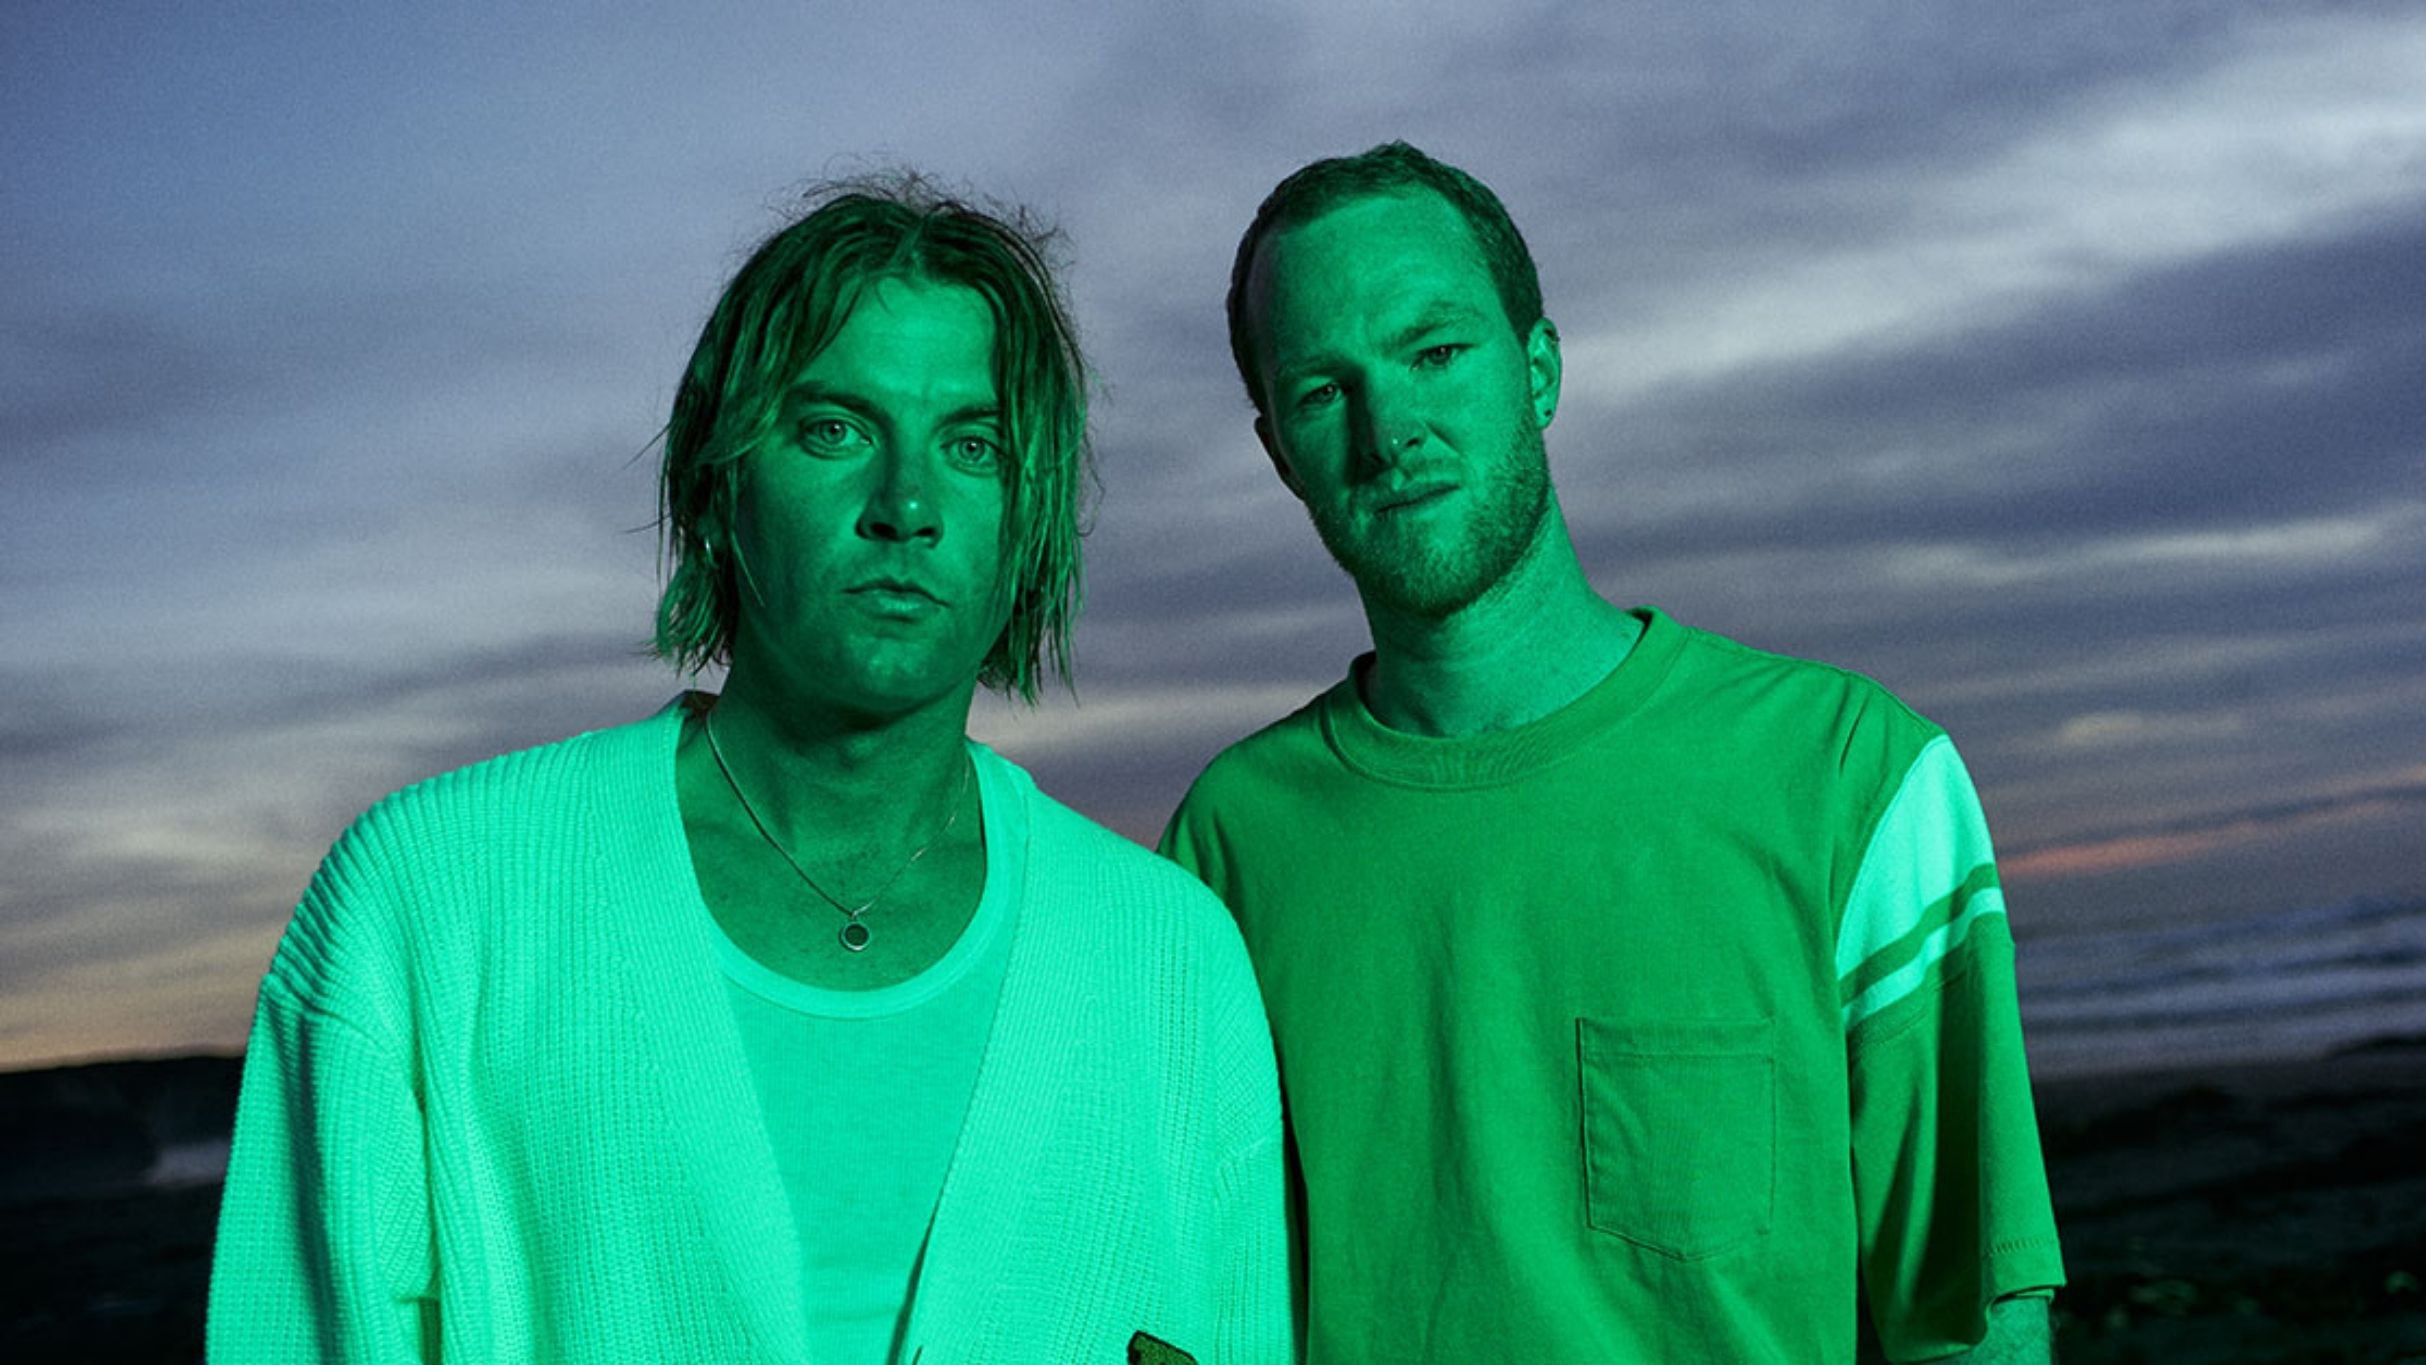 Judah & the Lion - The Process Tour presale code for genuine tickets in Tulsa